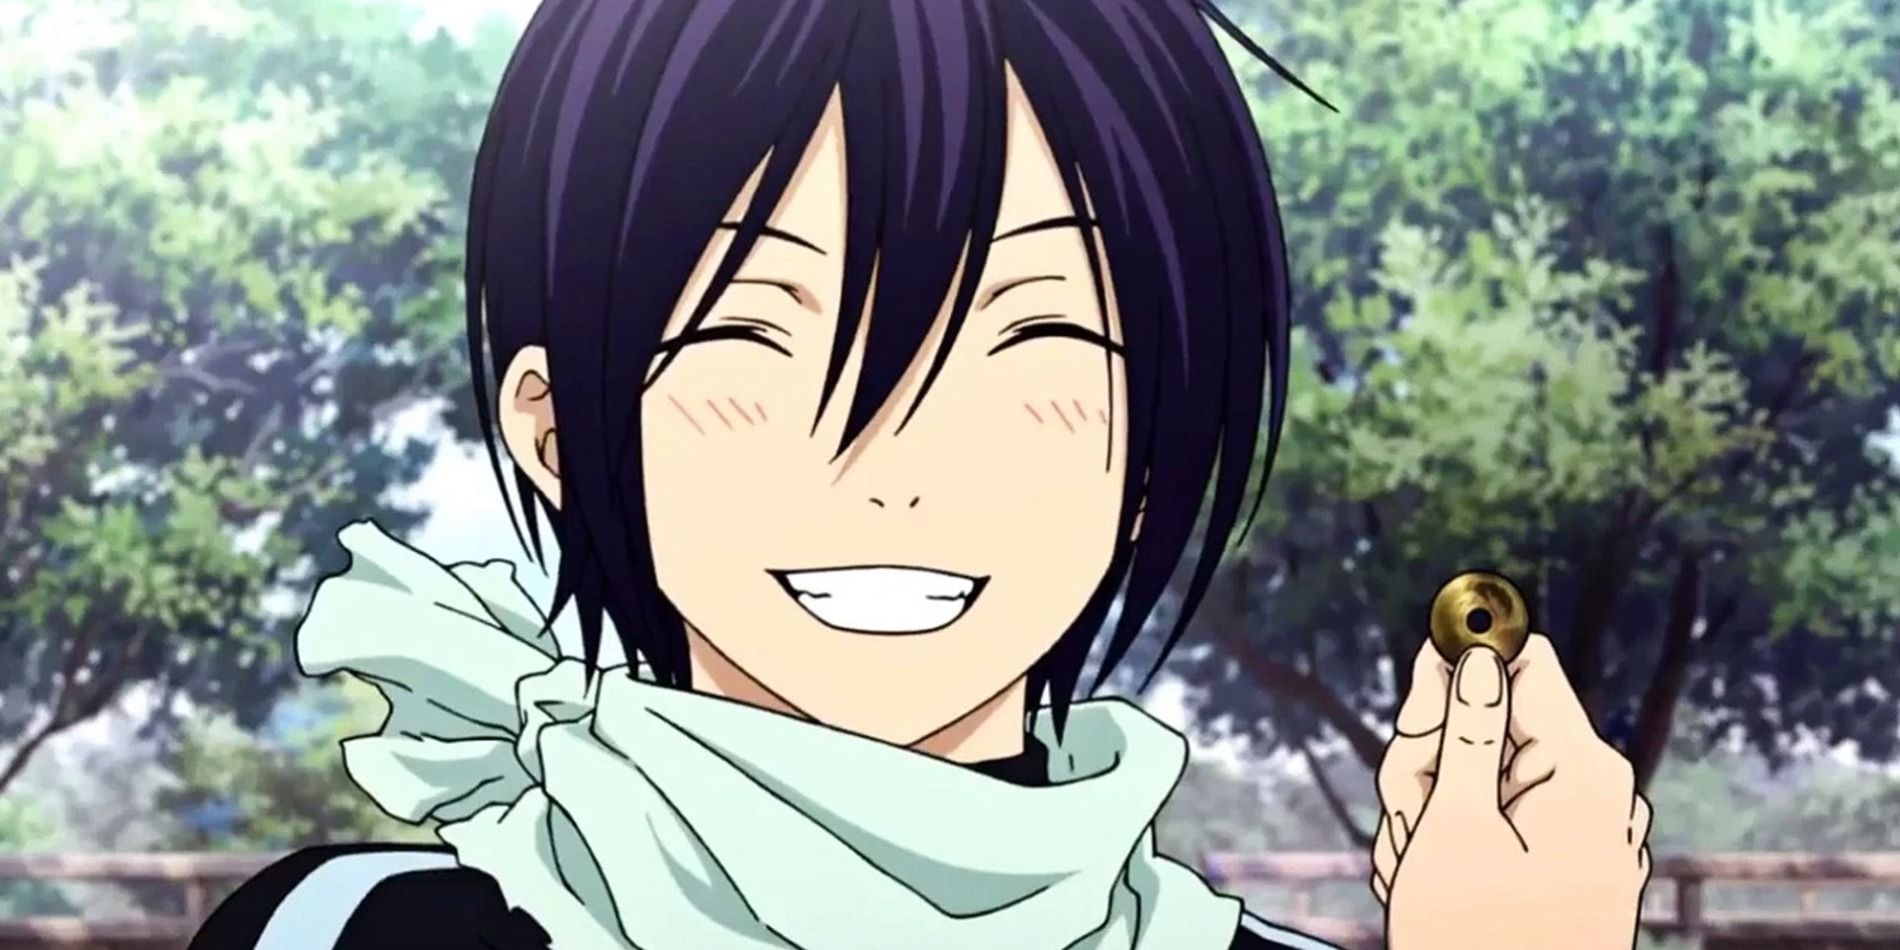 Noragami-Yato-Holding-Coin